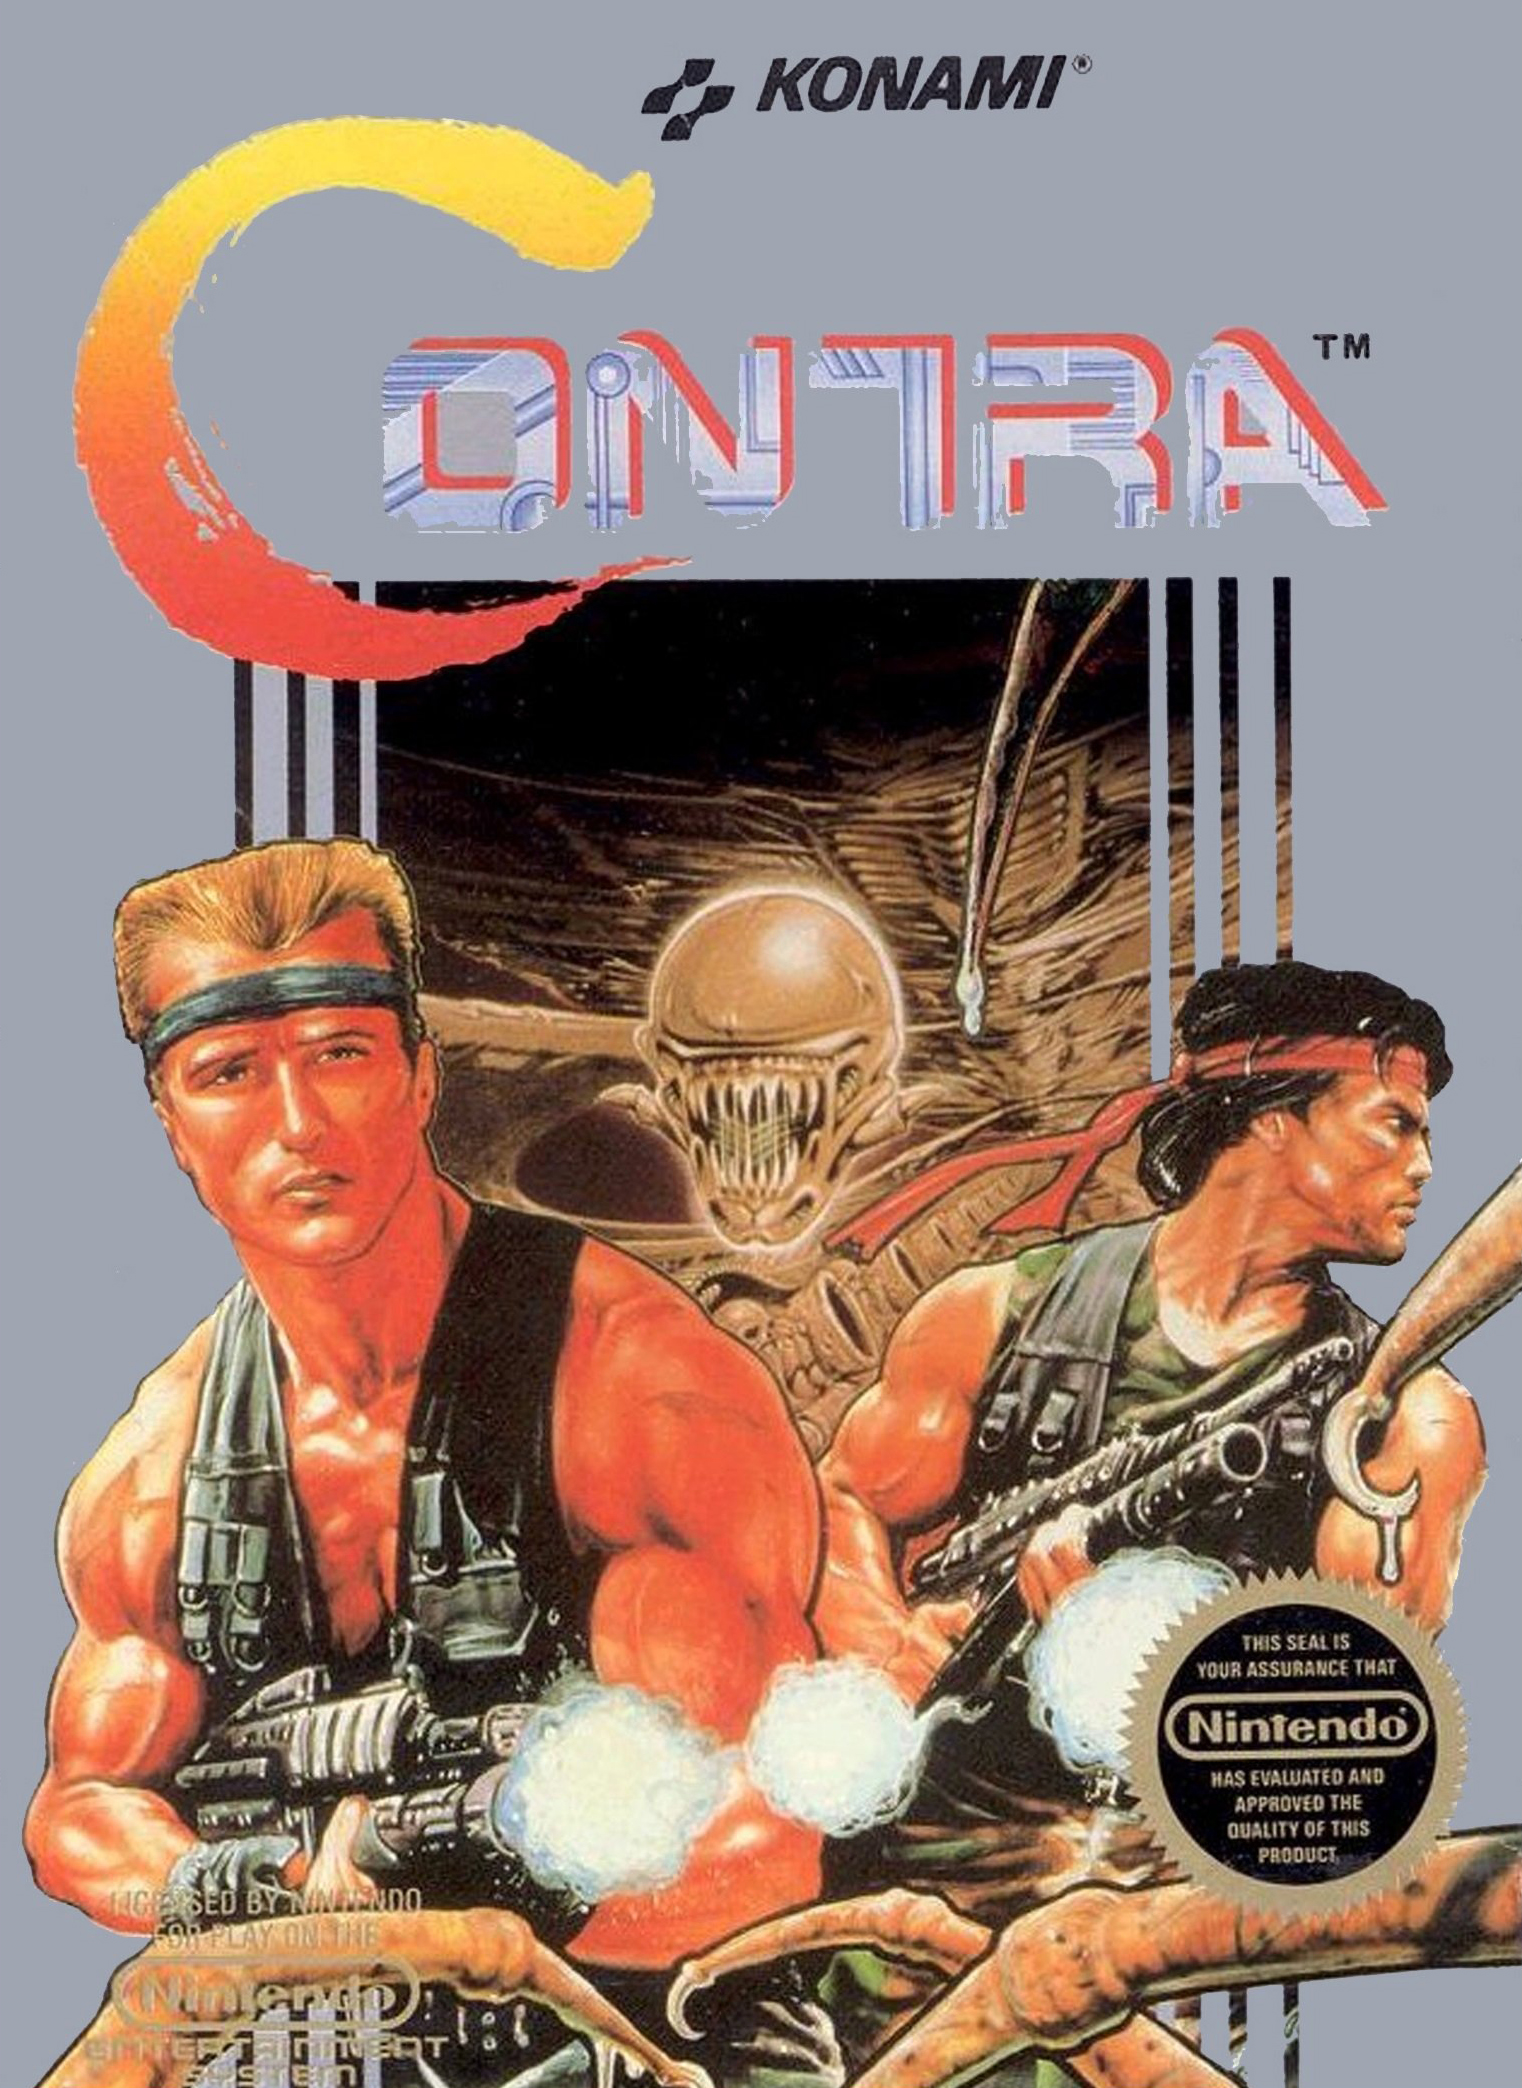 Collector Offers To Pay $US100,000 For Original Contra Box Art